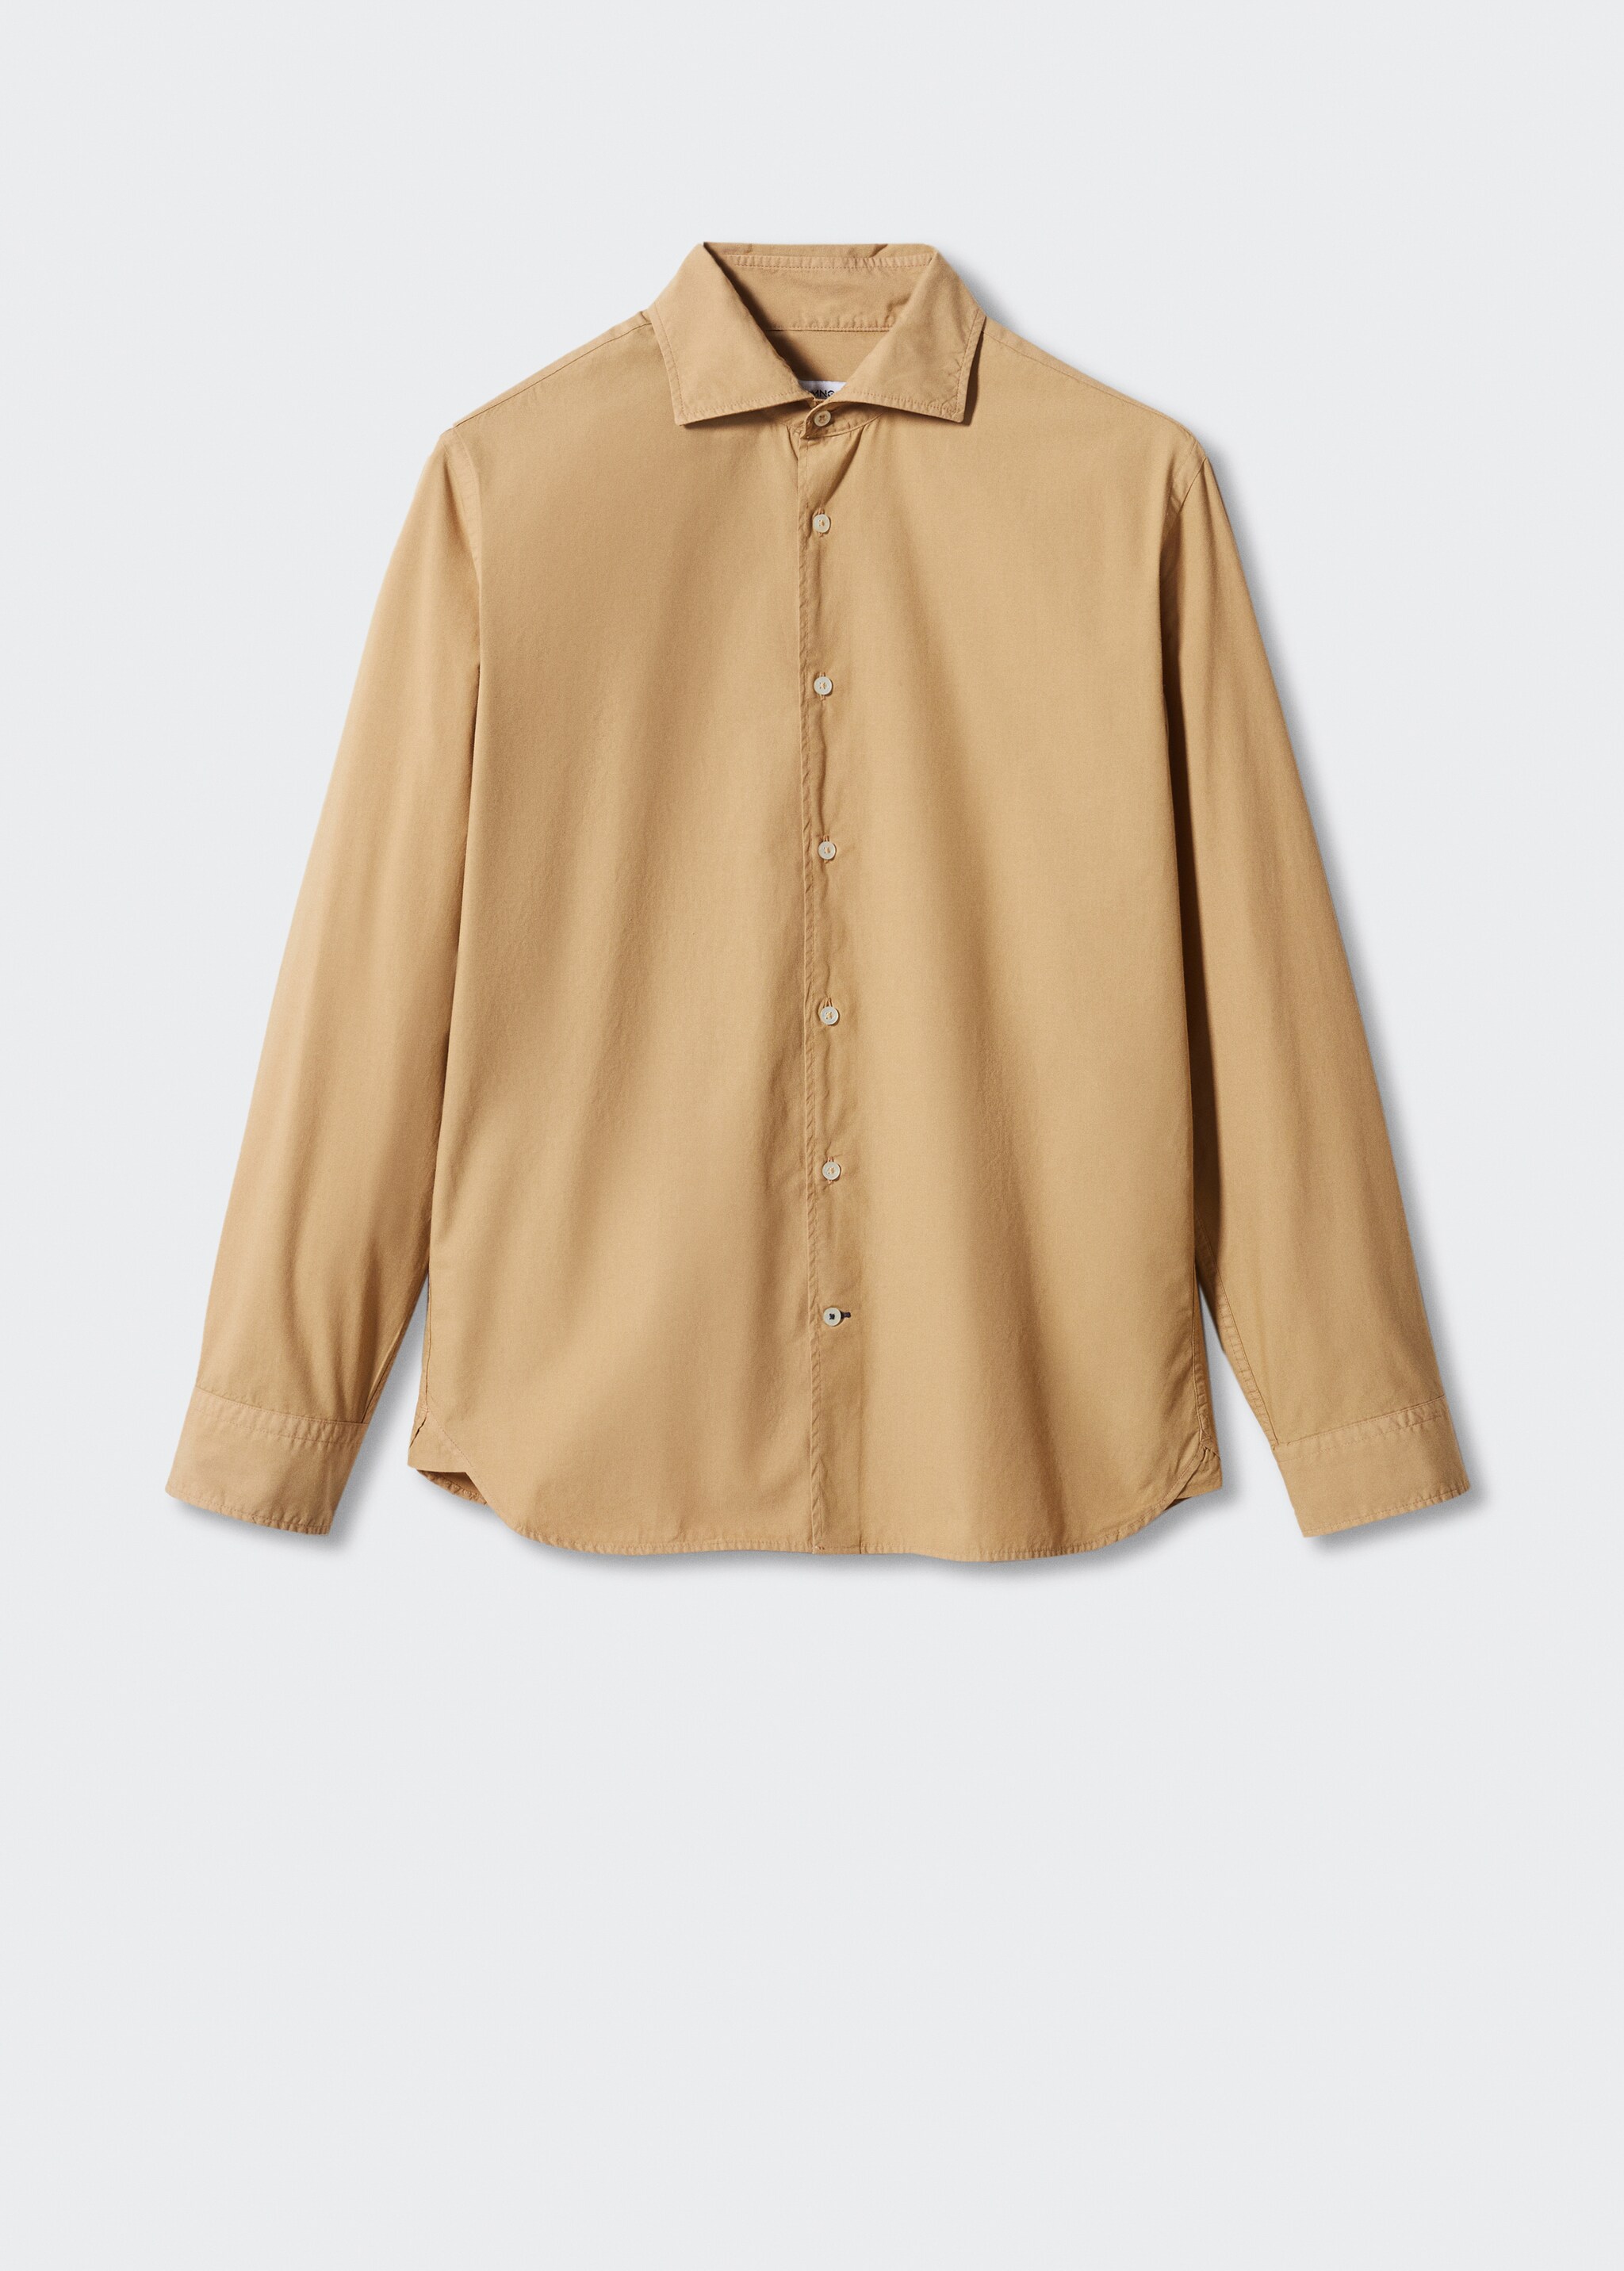 100% cotton shirt - Article without model